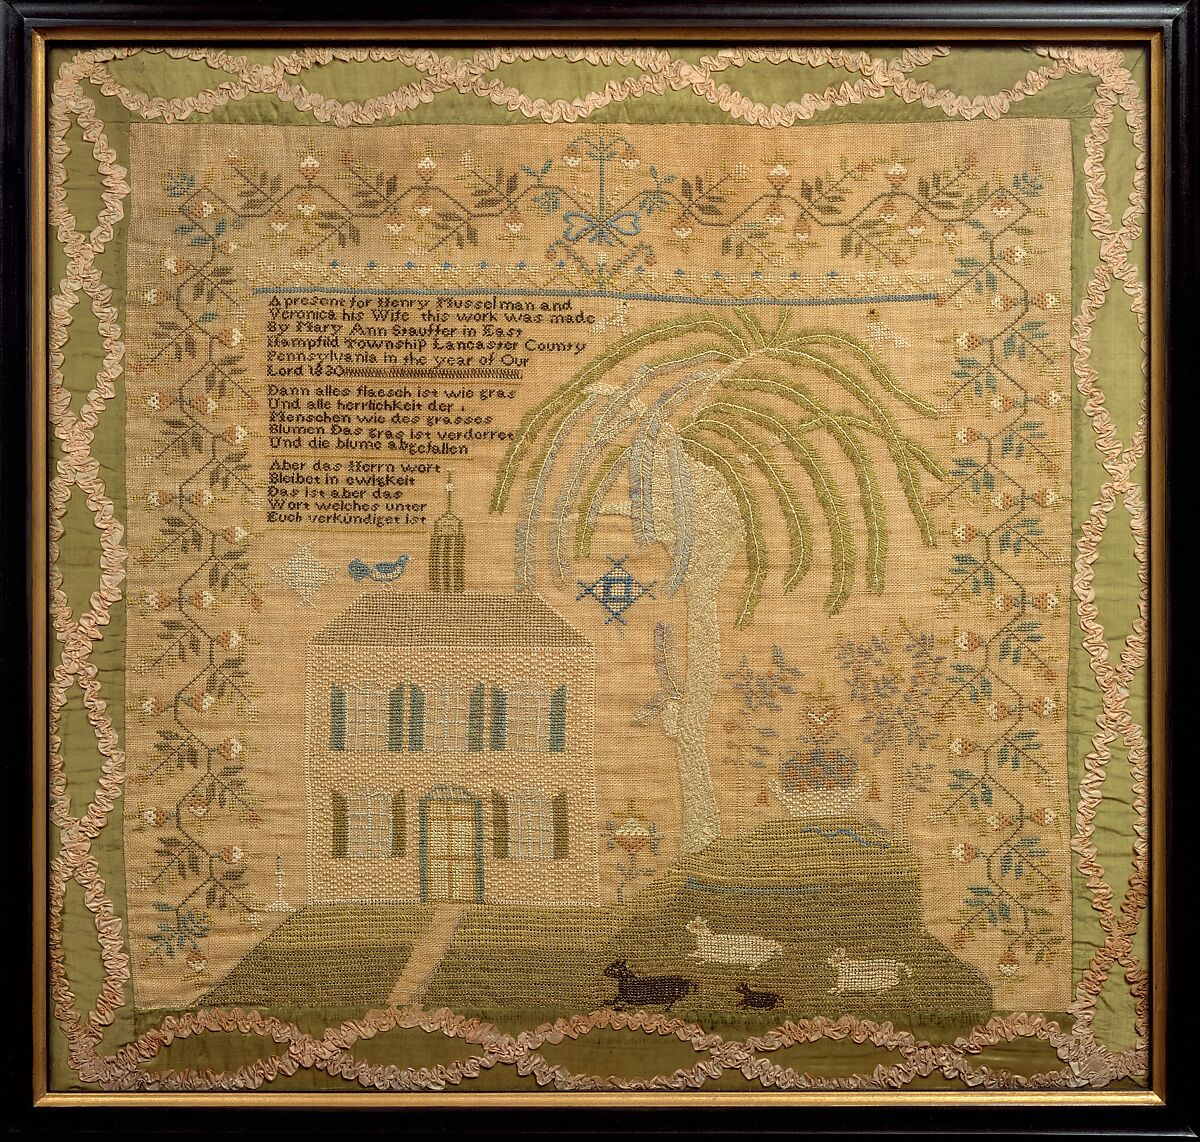 Embroidered Sampler, Mary Ann Stauffer (1811–1891), Embroidered silk on linen, American 